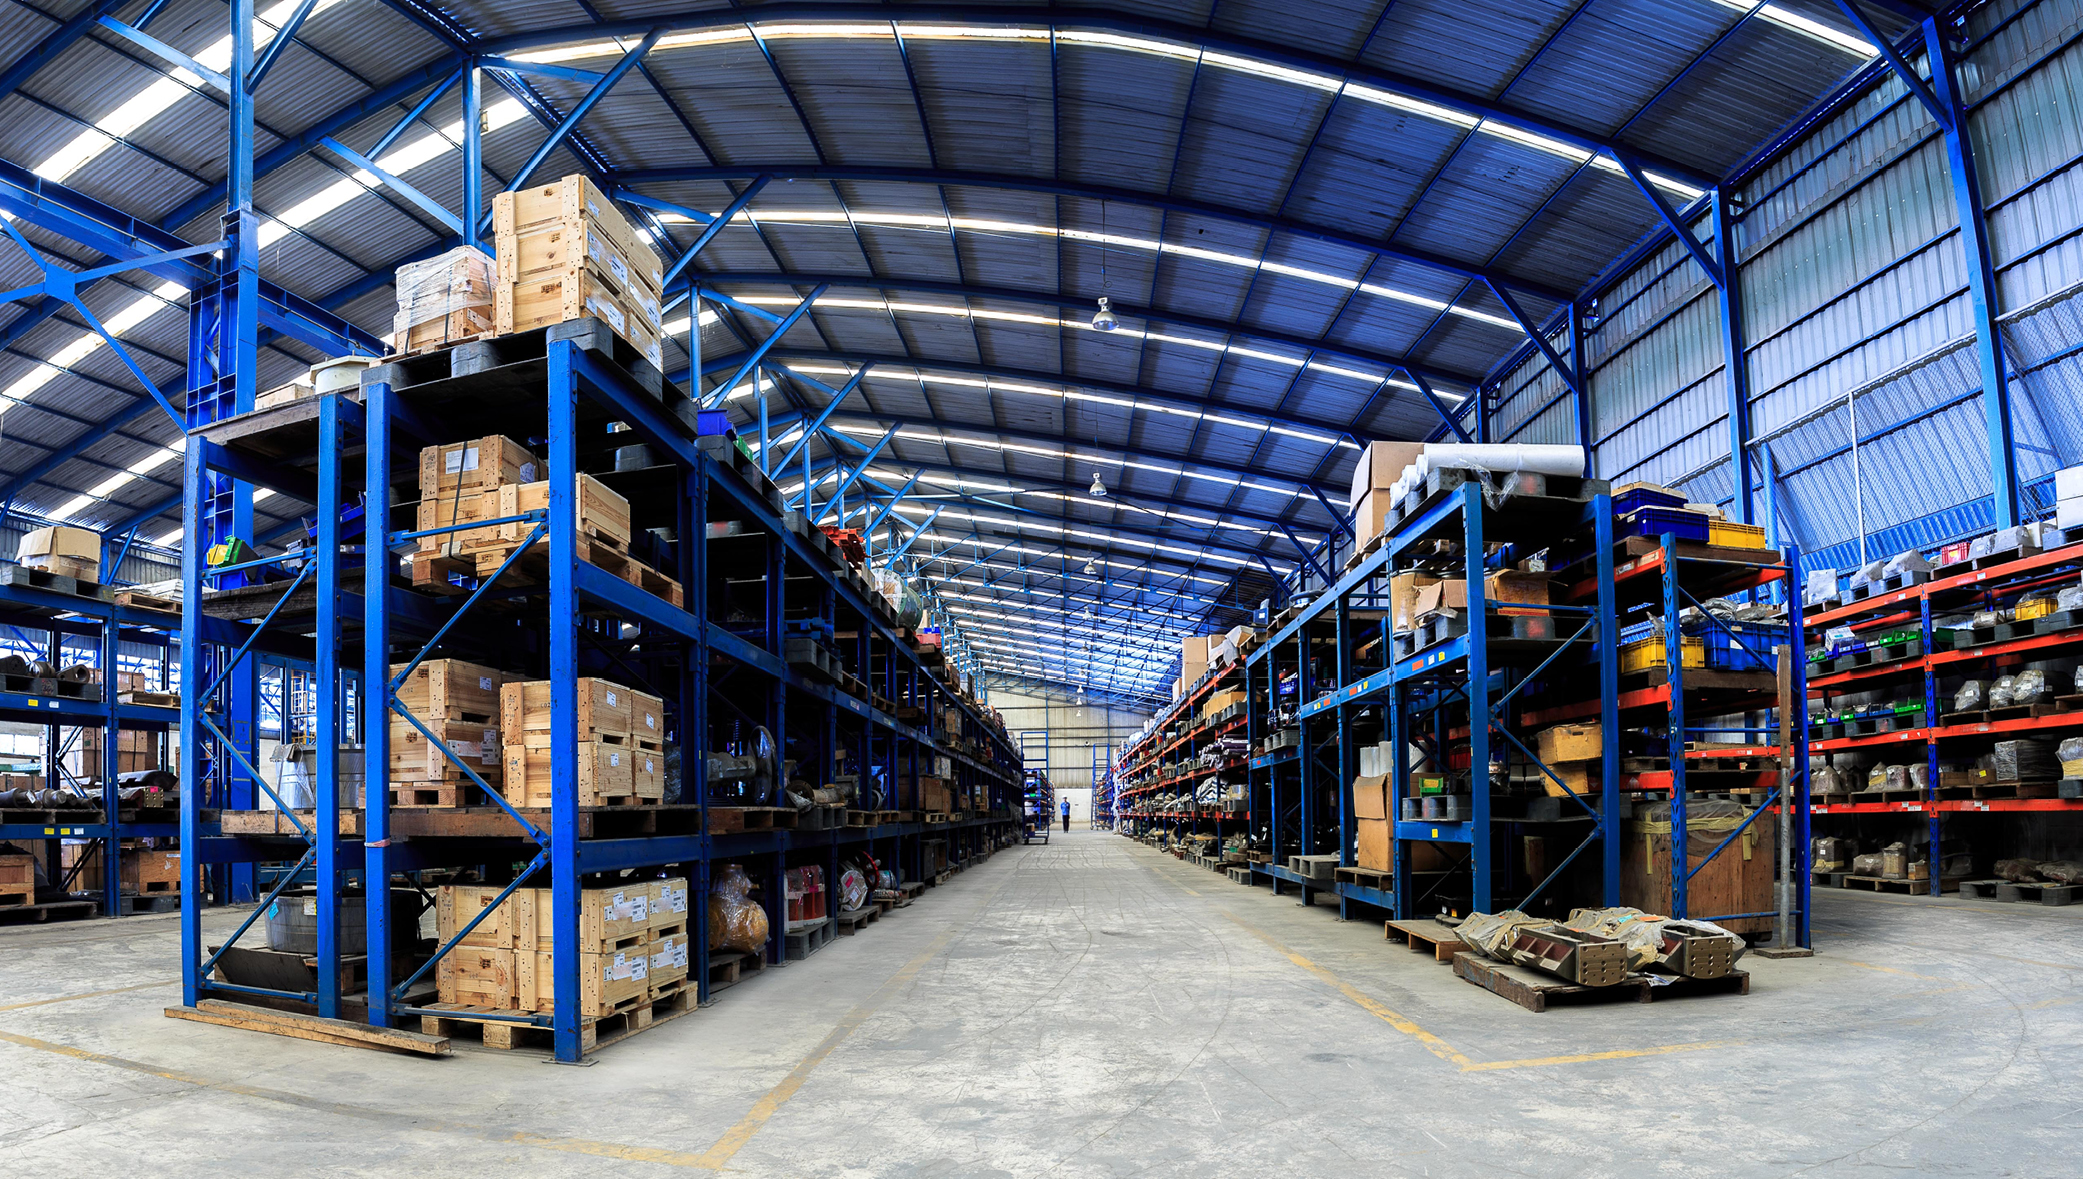 Warehouse Design and Operations Professional (WDOP)